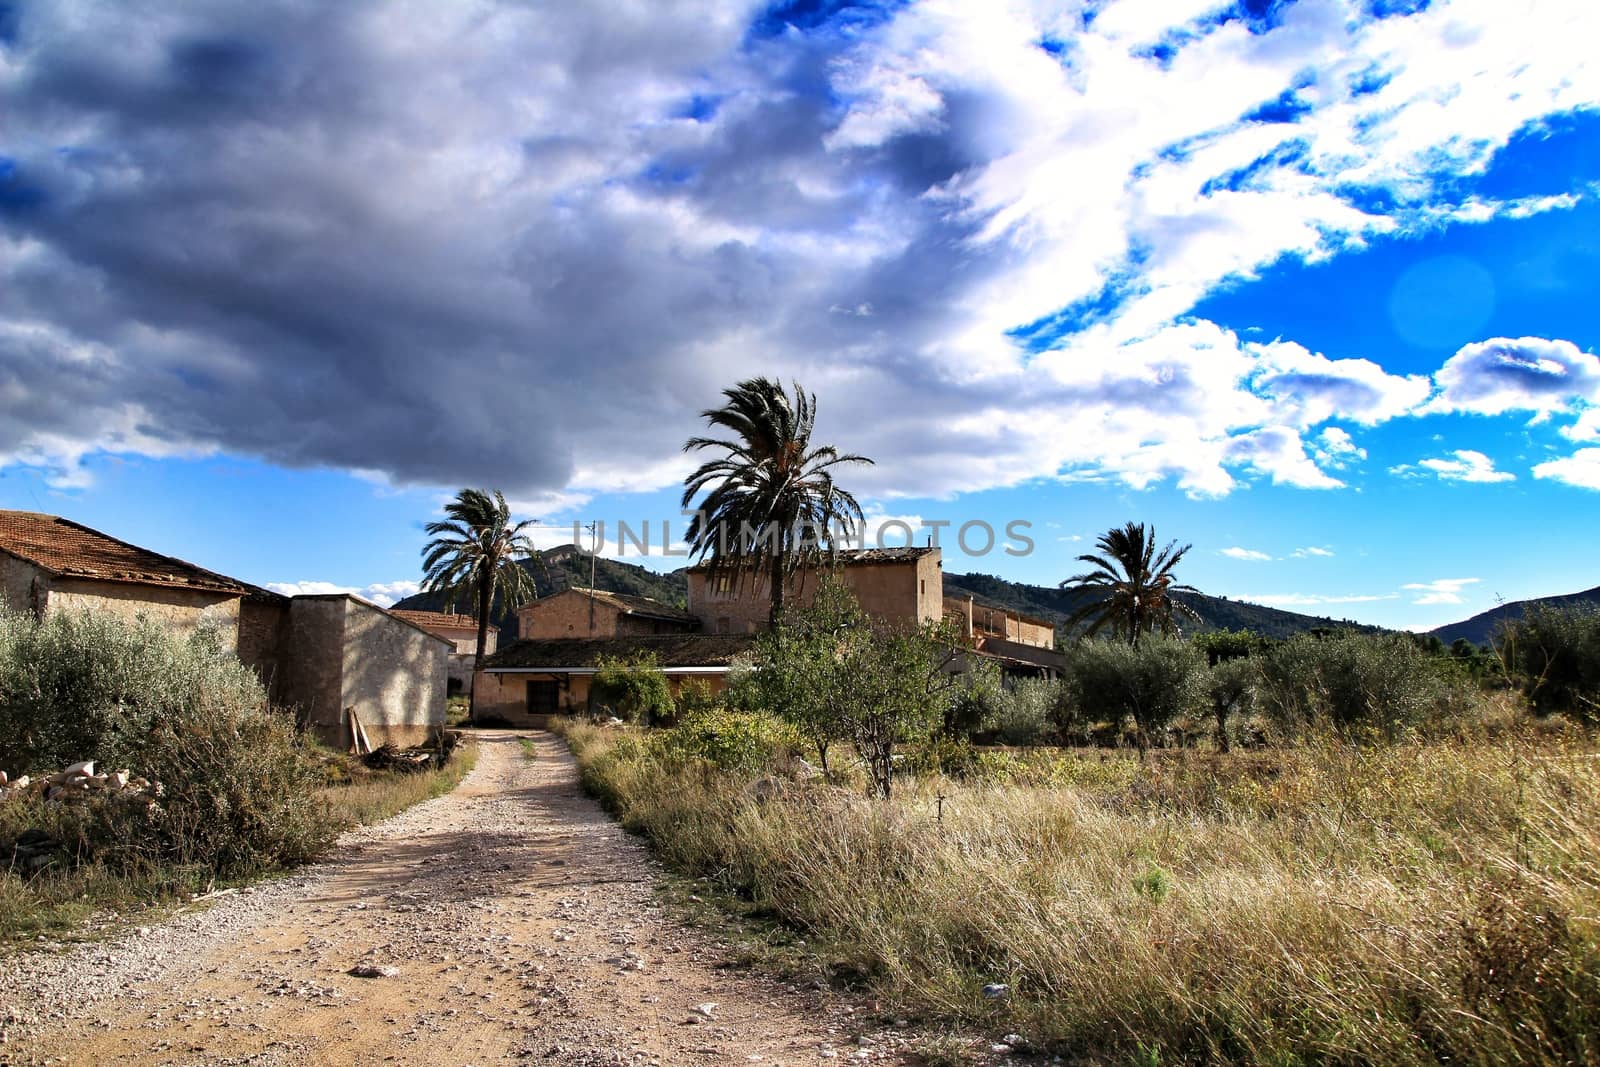 Beautiful country house in Hondon de las nieves, Alicante province, Spain, under cloudy sky and surrounded by vegetation